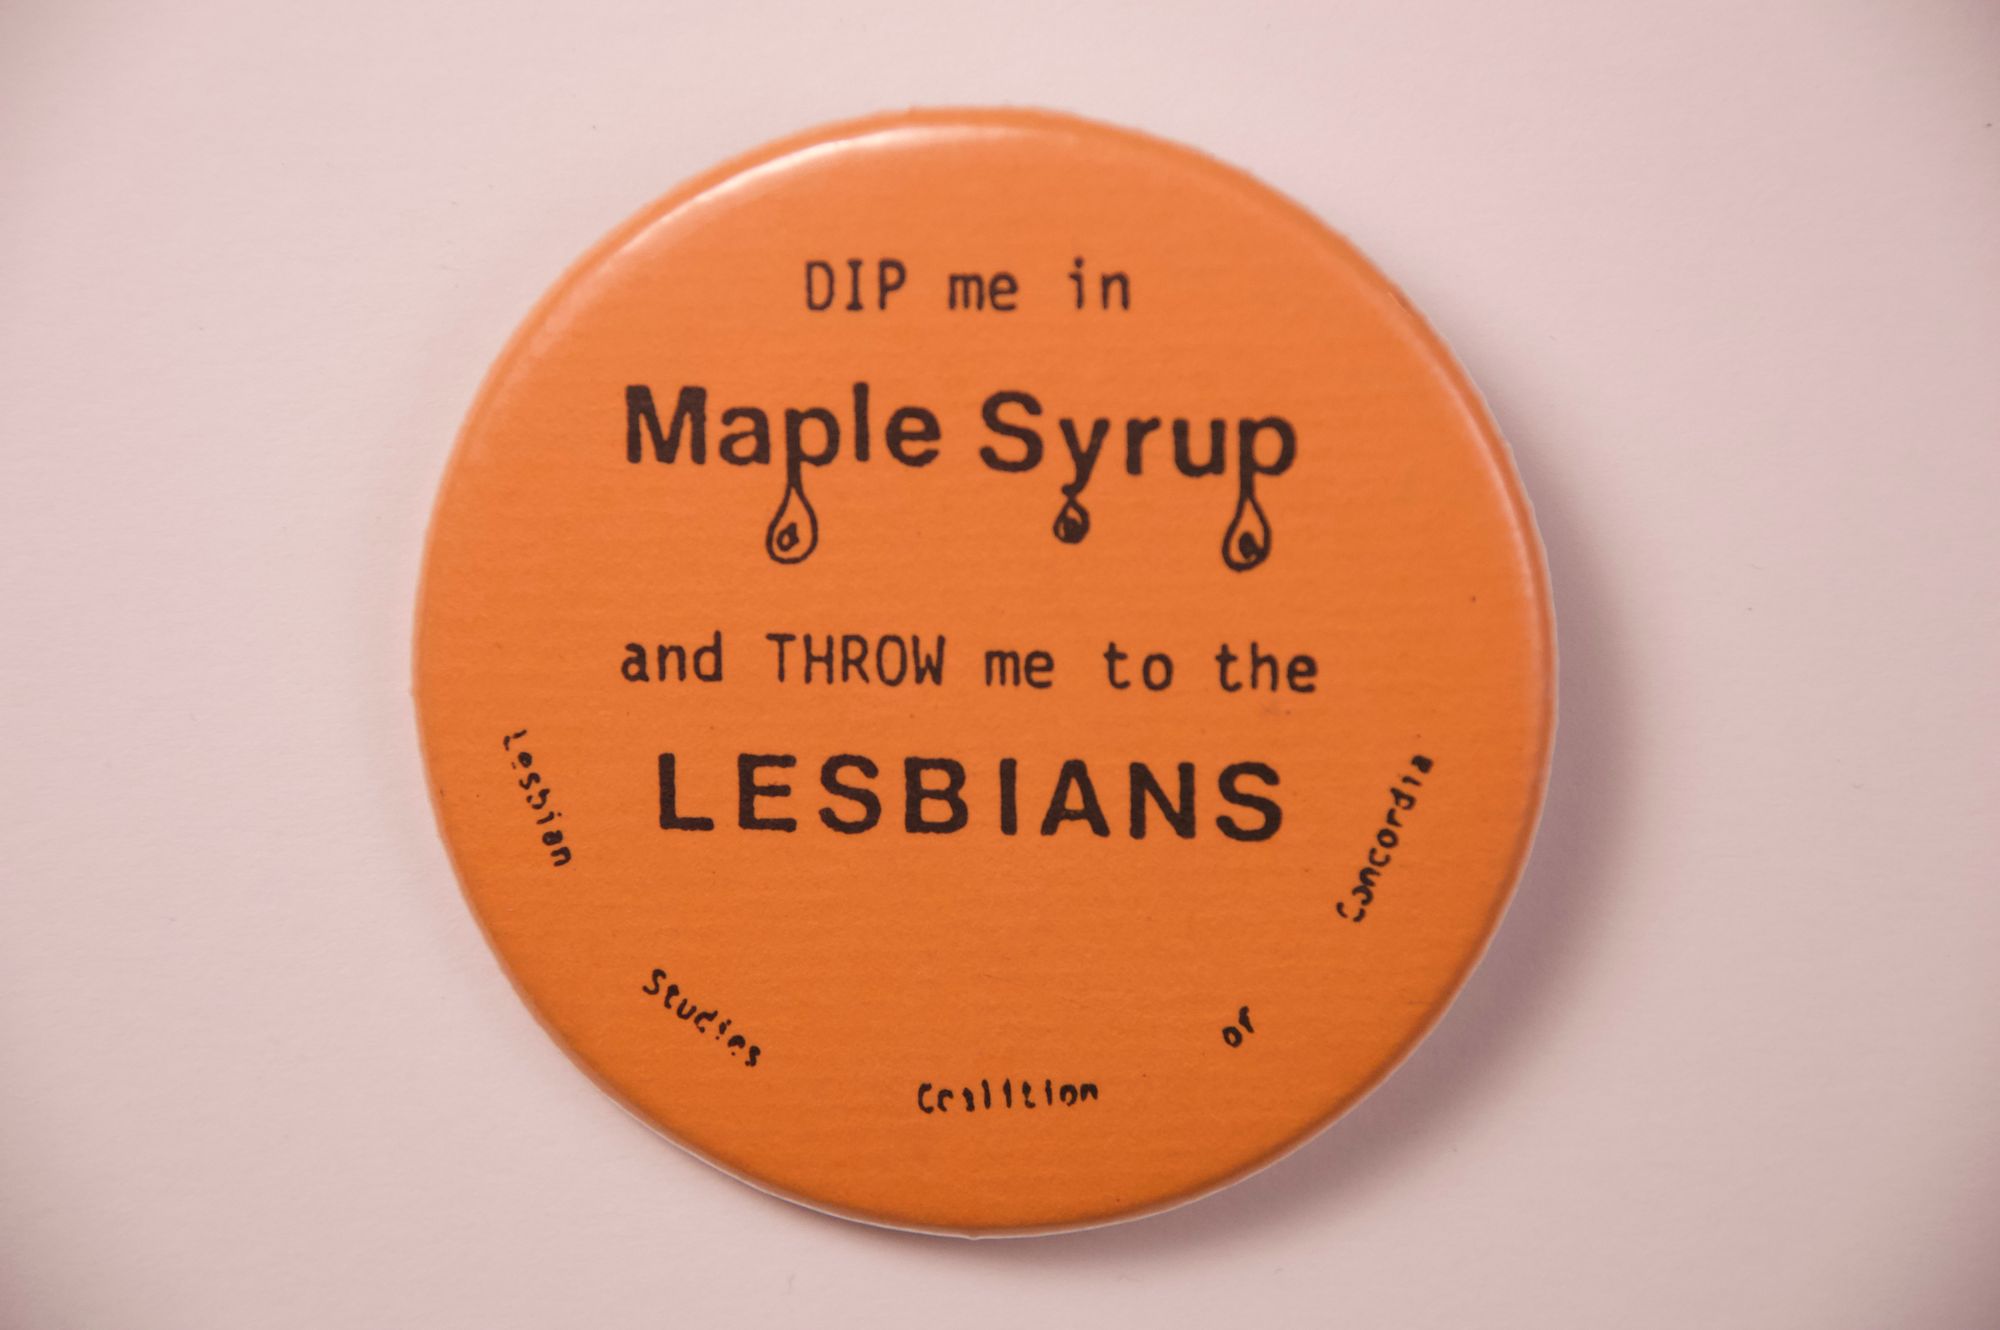 Dip me in maple syrup and throw me to the lesbians: Exploring the still-smoldering embers of unrealized queer revolutions.